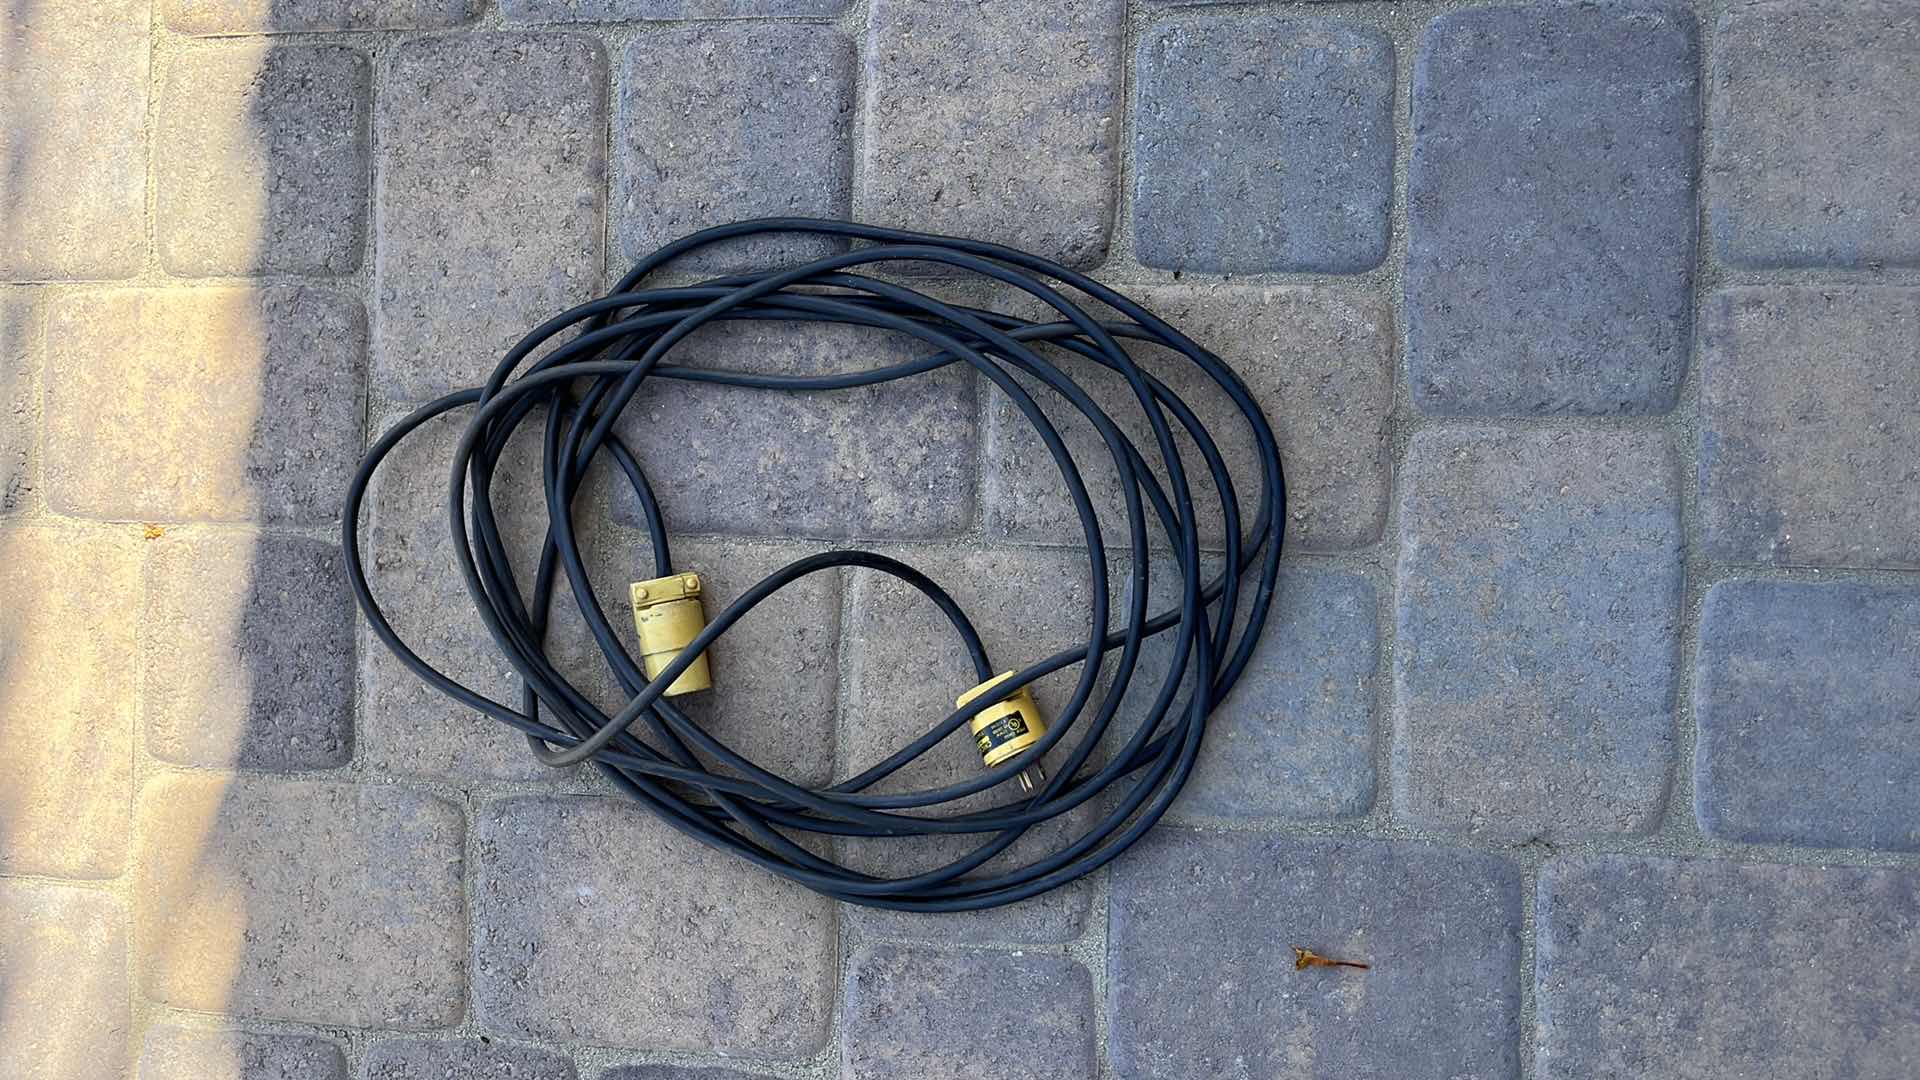 Photo 2 of POWER CORDS SET OF 2, BUNDLE OF ROPE